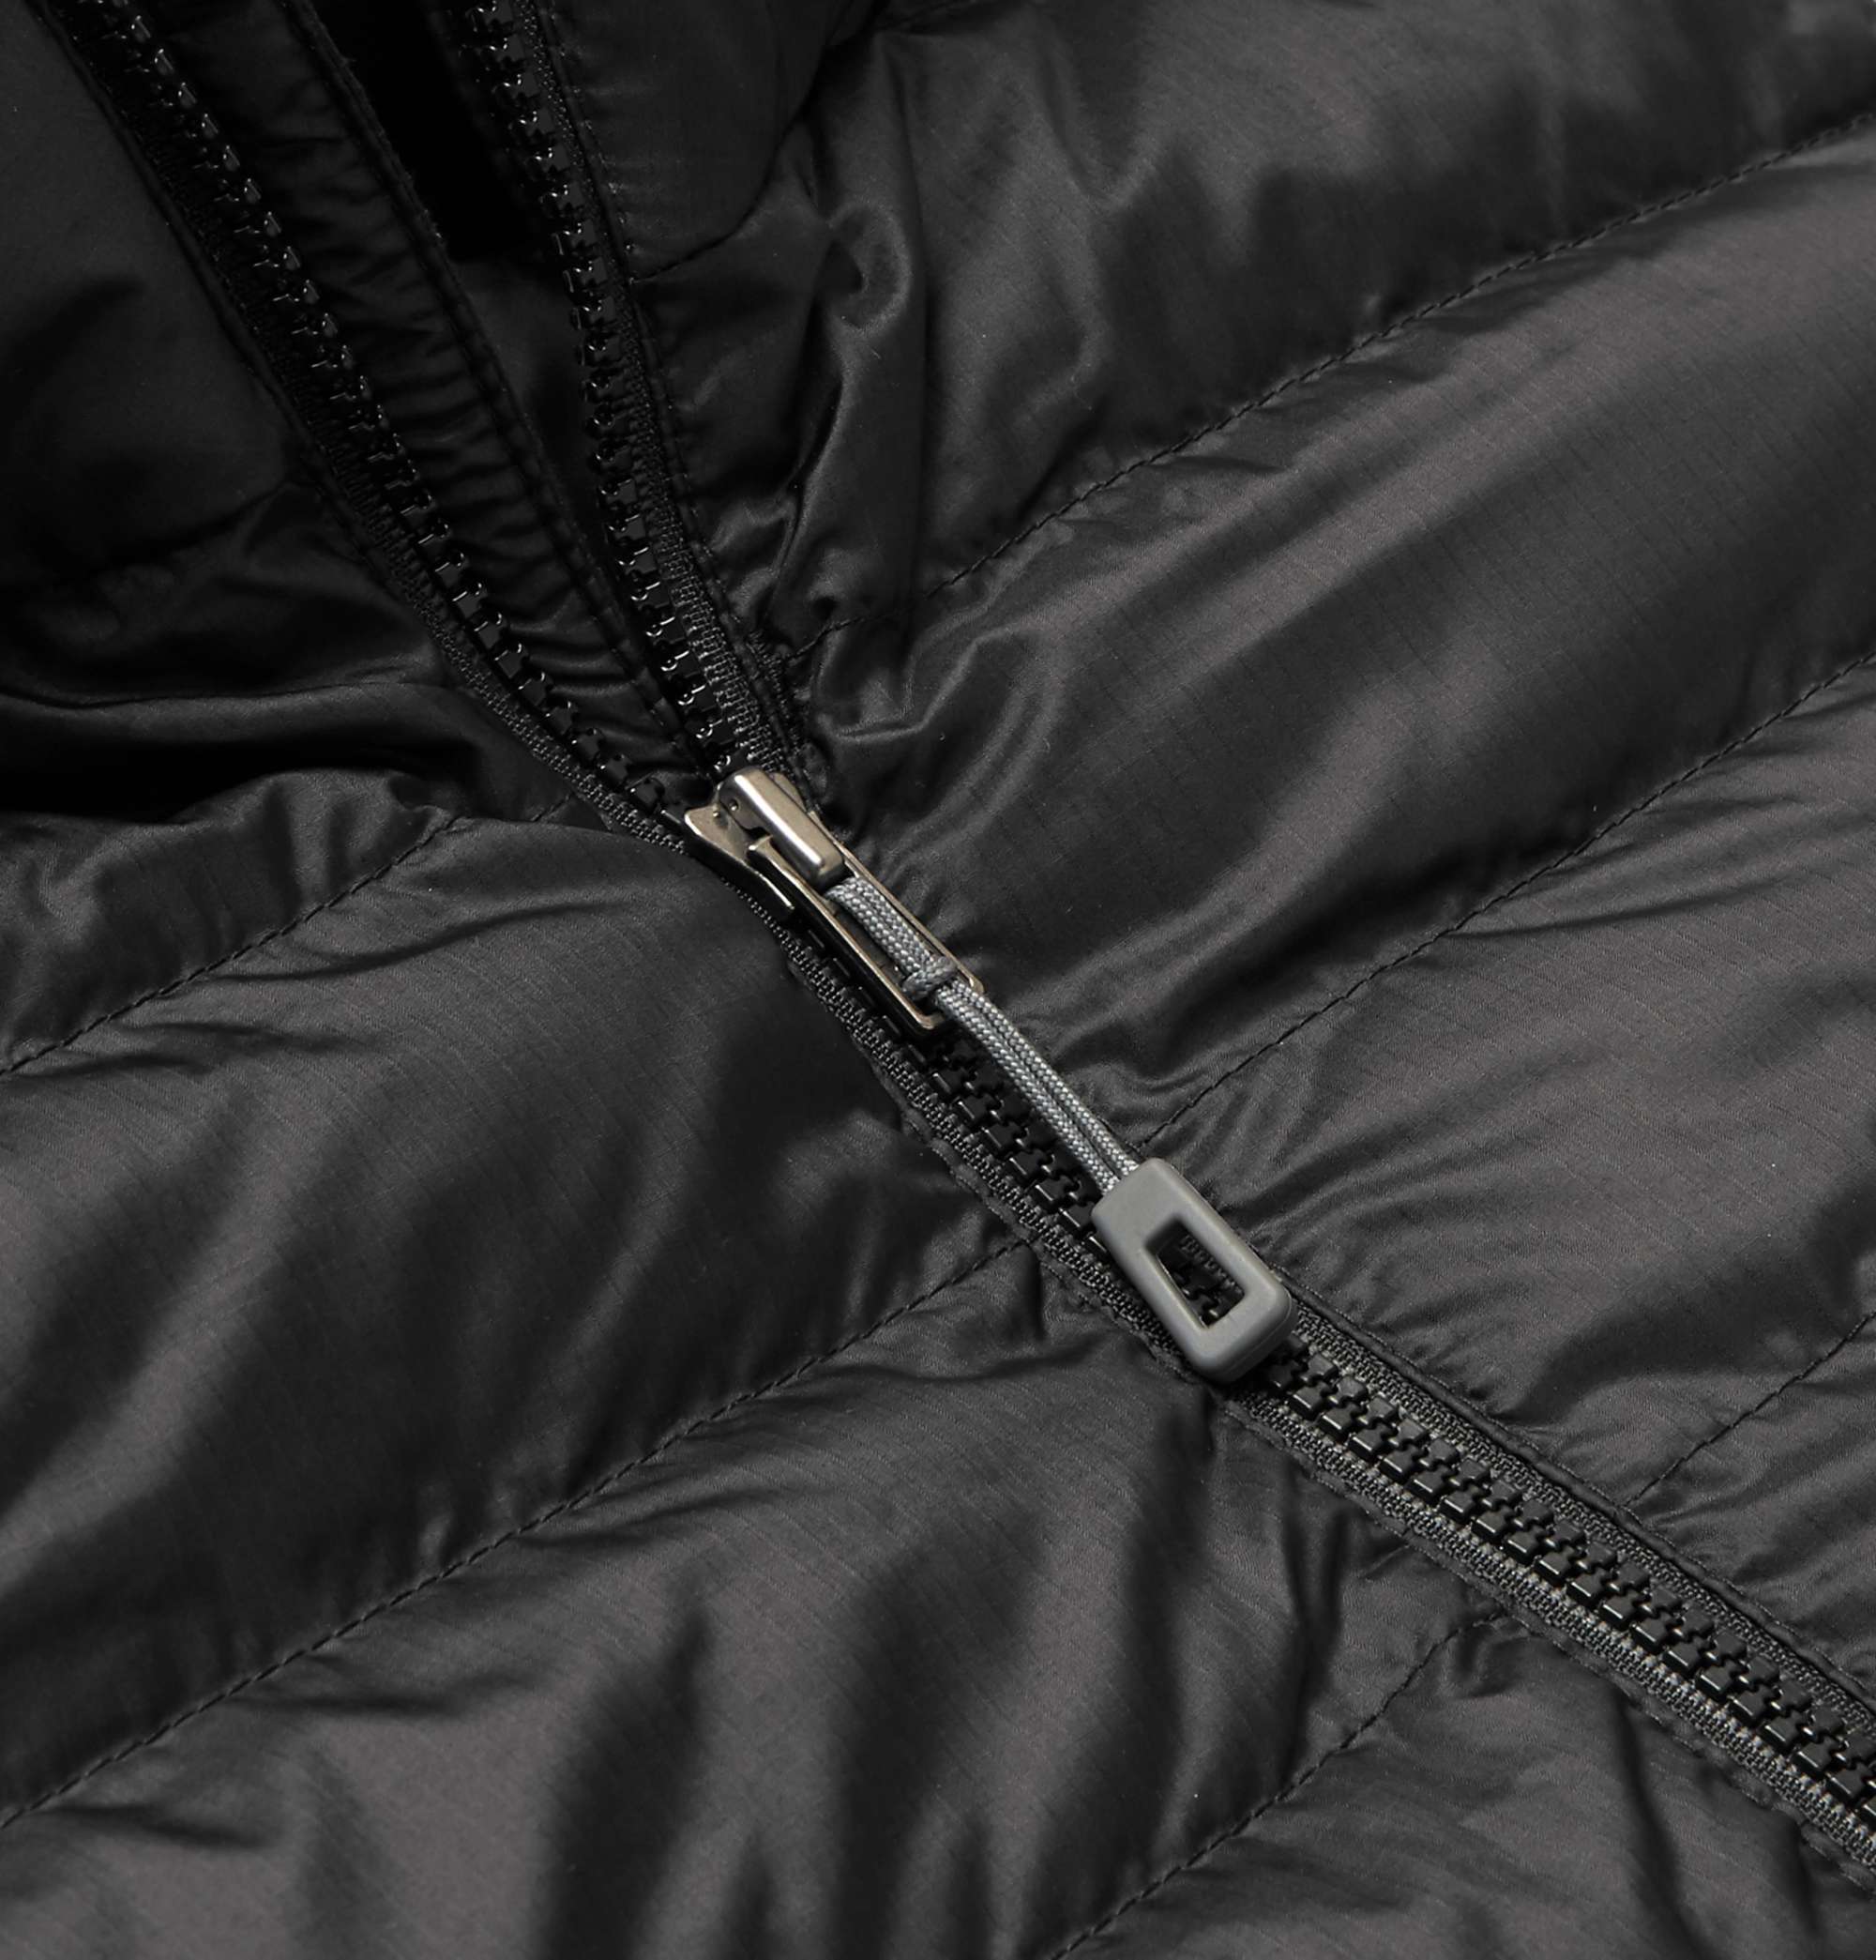 PATAGONIA Quilted DWR-Coated Ripstop Hooded Down Jacket